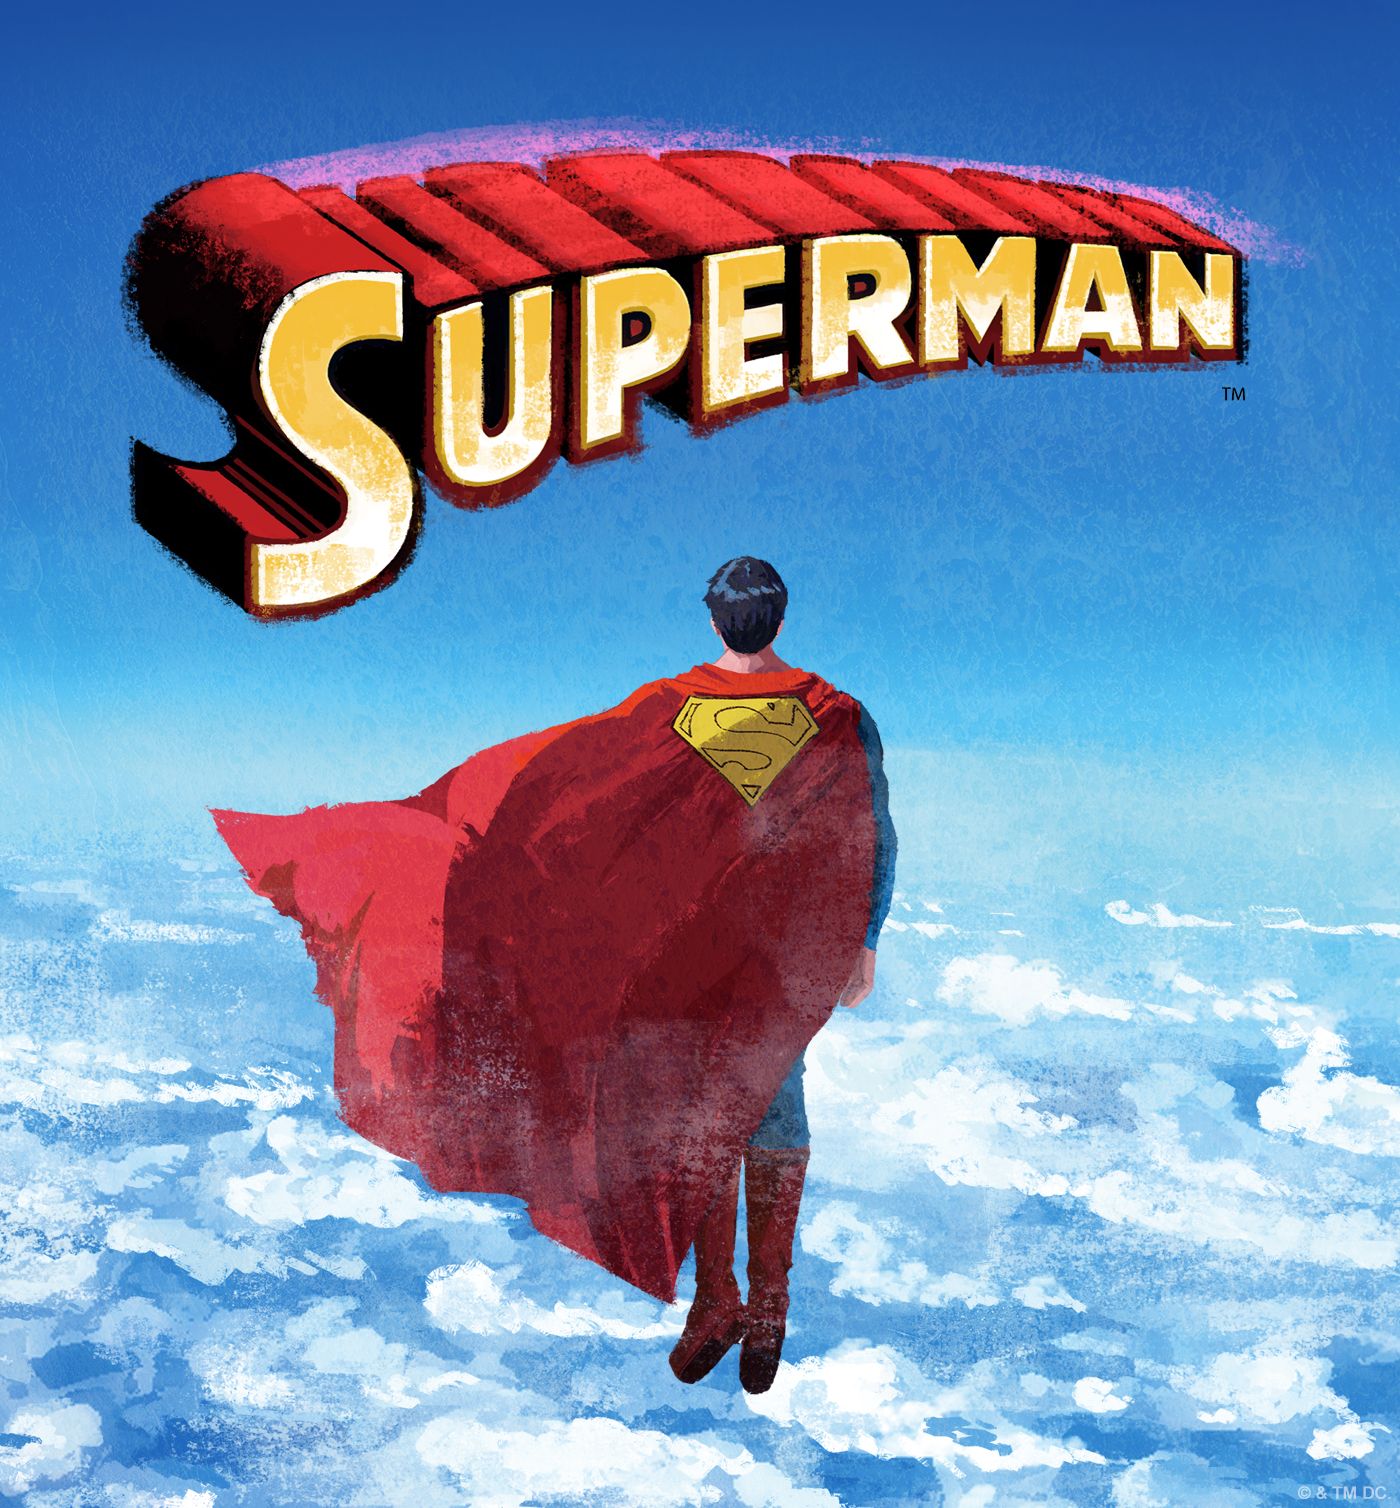 The Superman wordmark above Superman with his back facing us looking out at a clear blue sky.